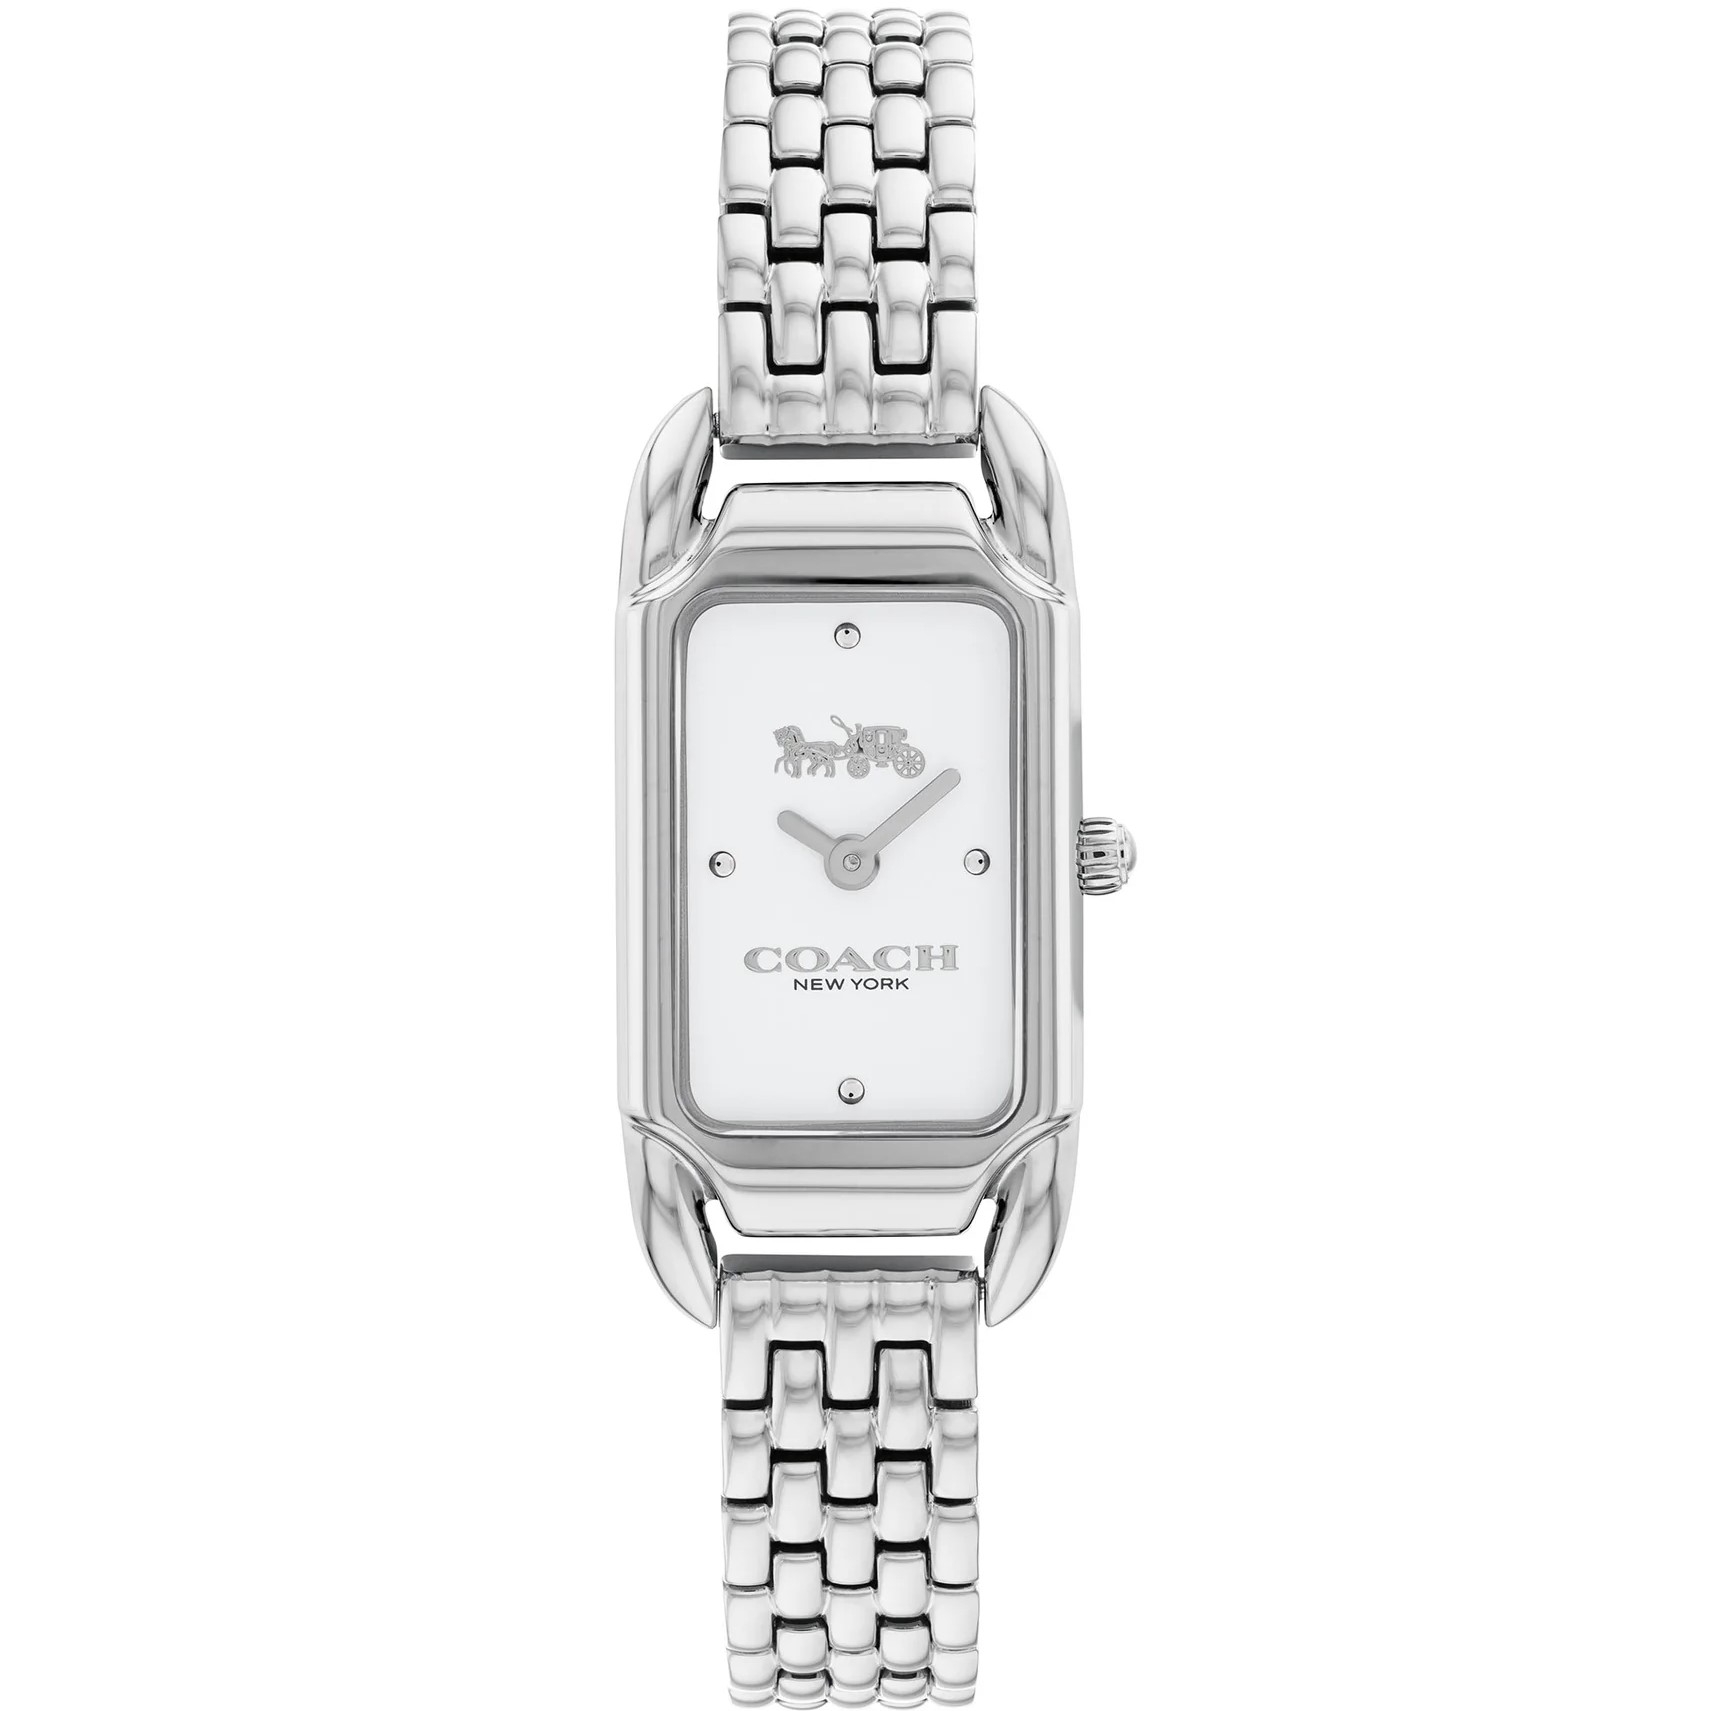 ĐỒNG HỒ ĐEO TAY NỮ COACH CADIE SILVER STAINLESS STEEL WHITE DIAL WOMENS WATCH 14504035 5